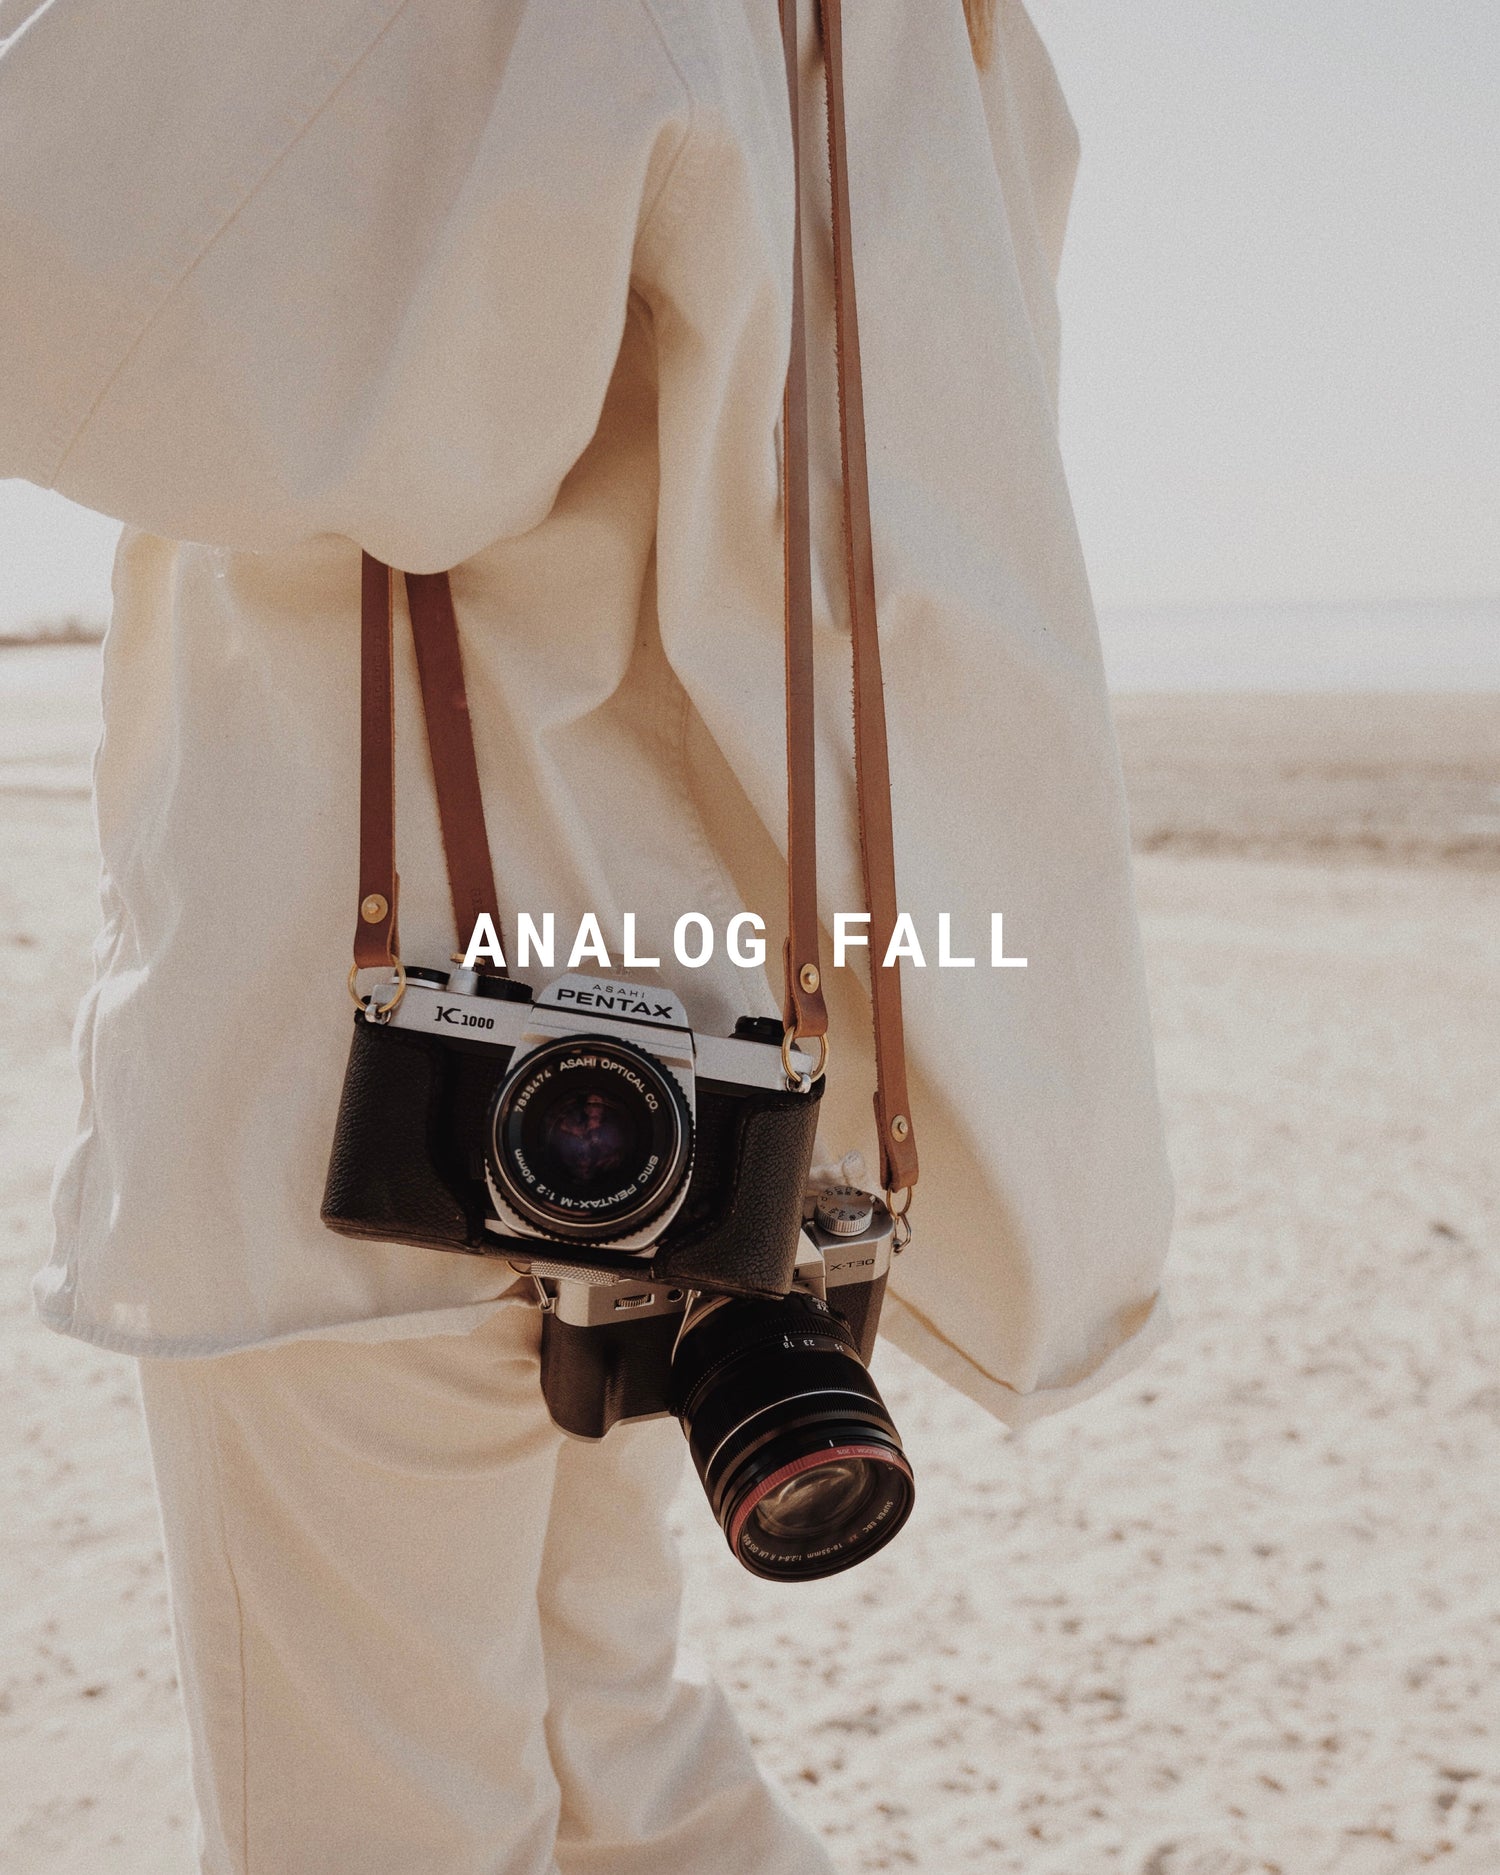 Analog Fall Leather Camera Straps and Accessories